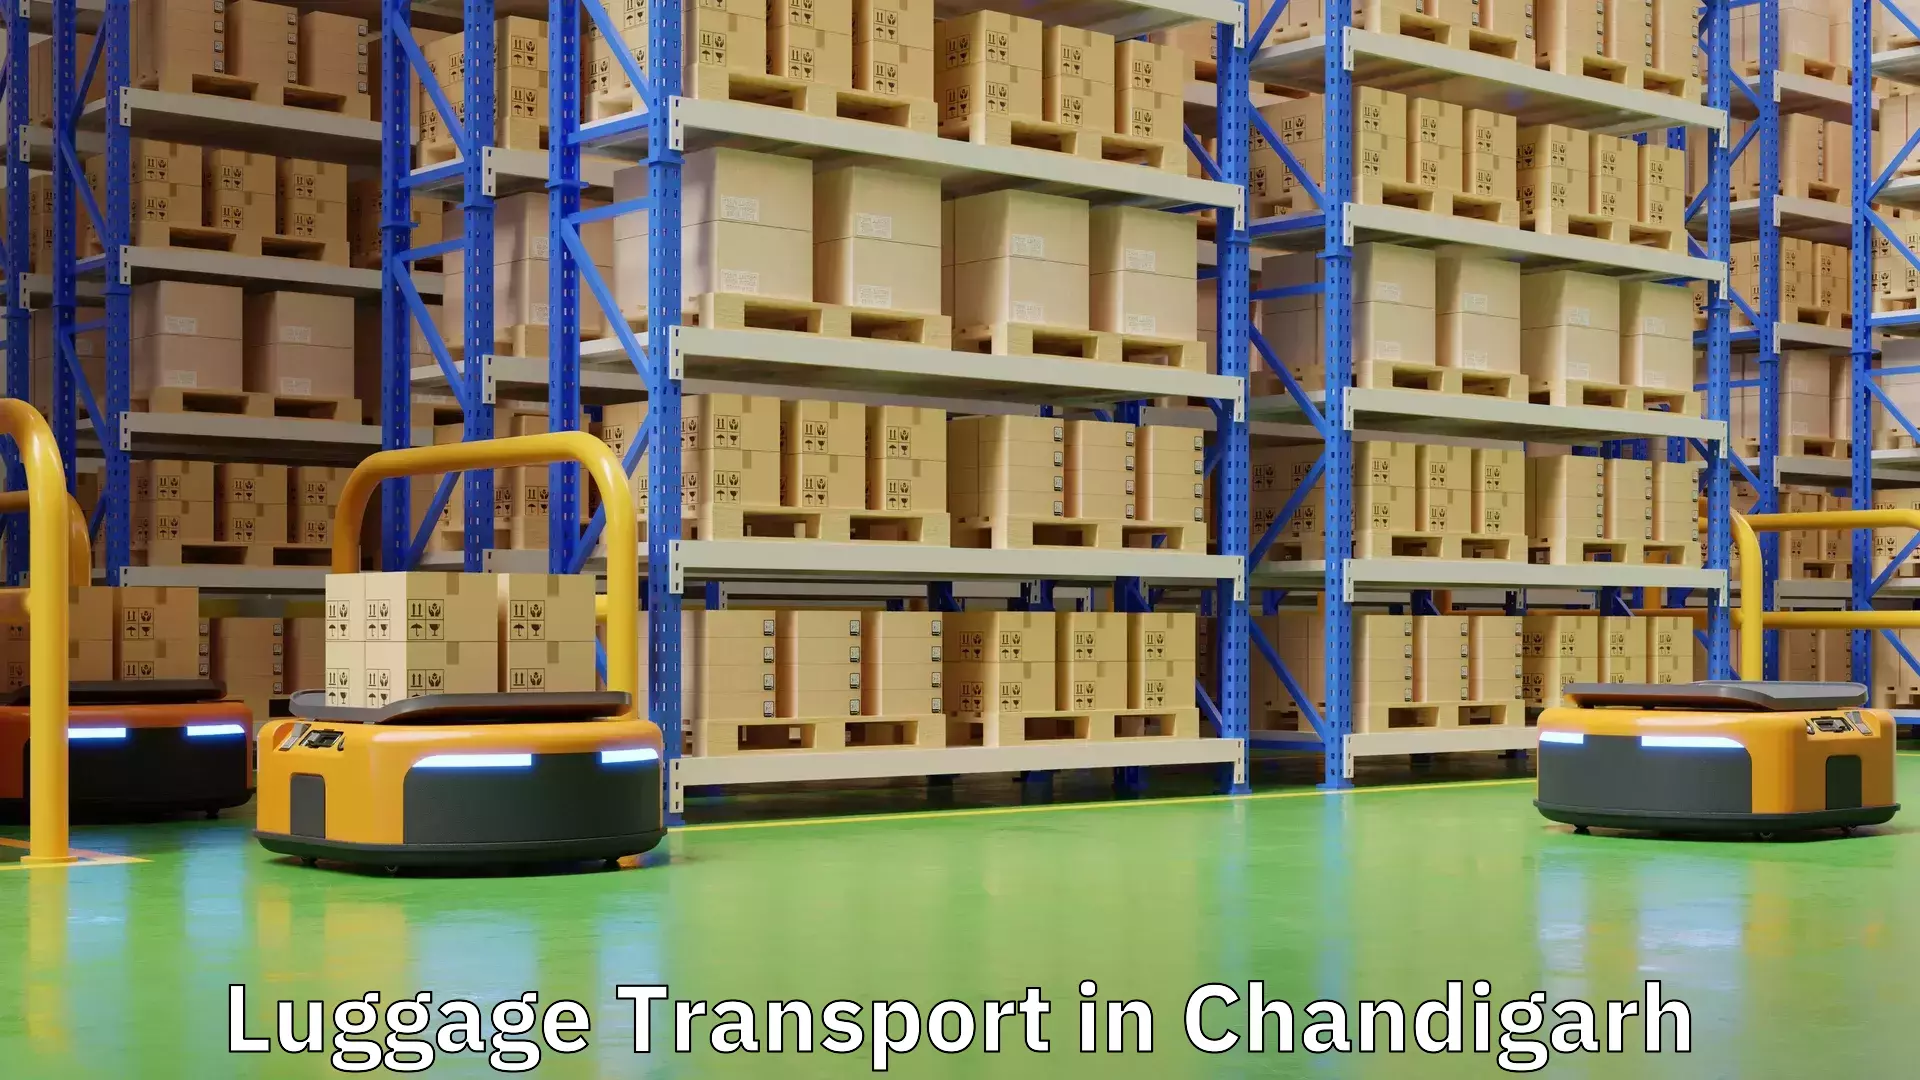 Luggage shipping trends in Chandigarh